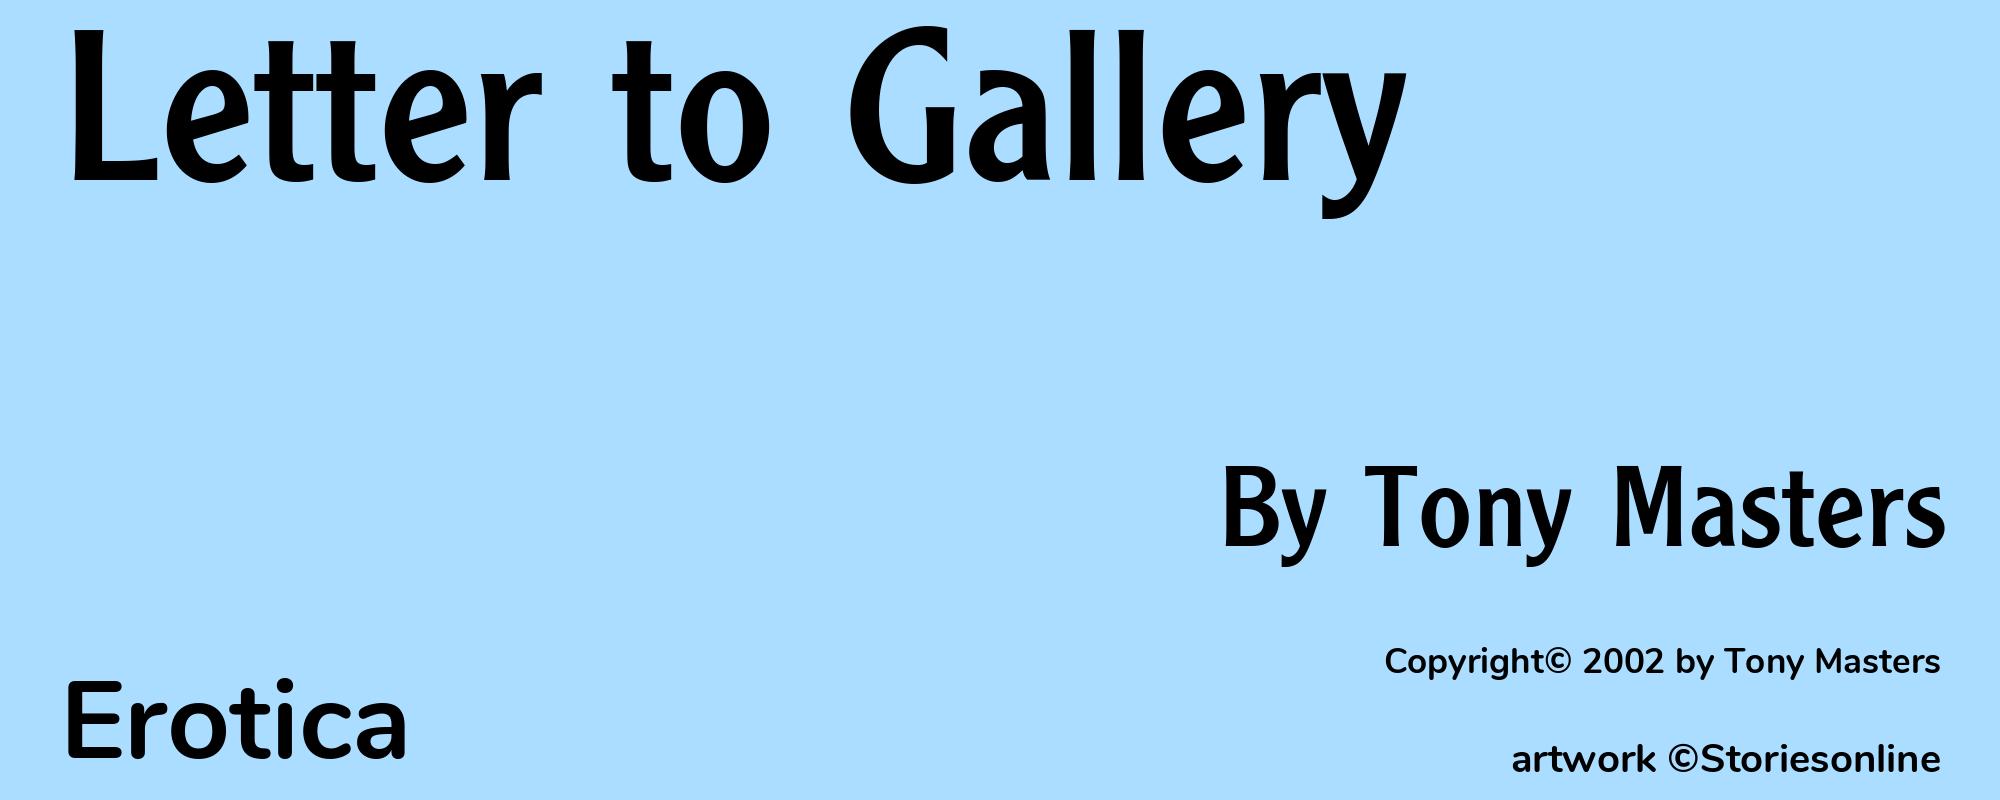 Letter to Gallery - Cover